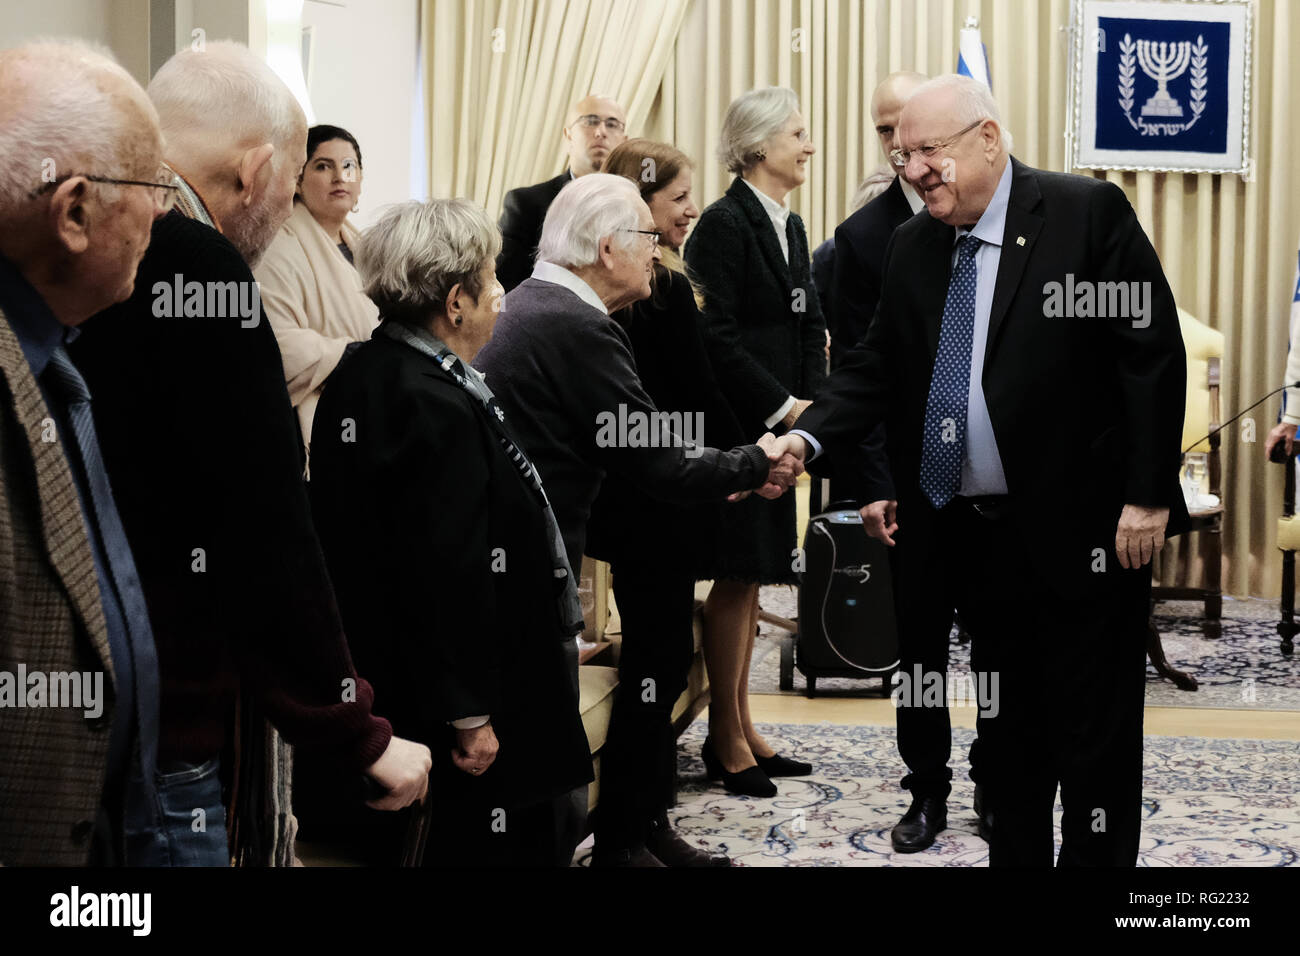 Jerusalem, Israel. 27th January, 2019. Israeli President REUVEN RIVLIN greets guests as he hosts Aktion Sühnezeichen Friedensdienste (Action Reconciliation Service for Peace) at the President's Residence, bringing together Holocaust survivors and ASF volunteers as well as German Ambassador to Israel Dr. Susanne Wasum Rainer on International Holocaust Remembrance Day. nd with Holocaust survivors in Israel. Credit: Nir Alon/Alamy Live News Stock Photo